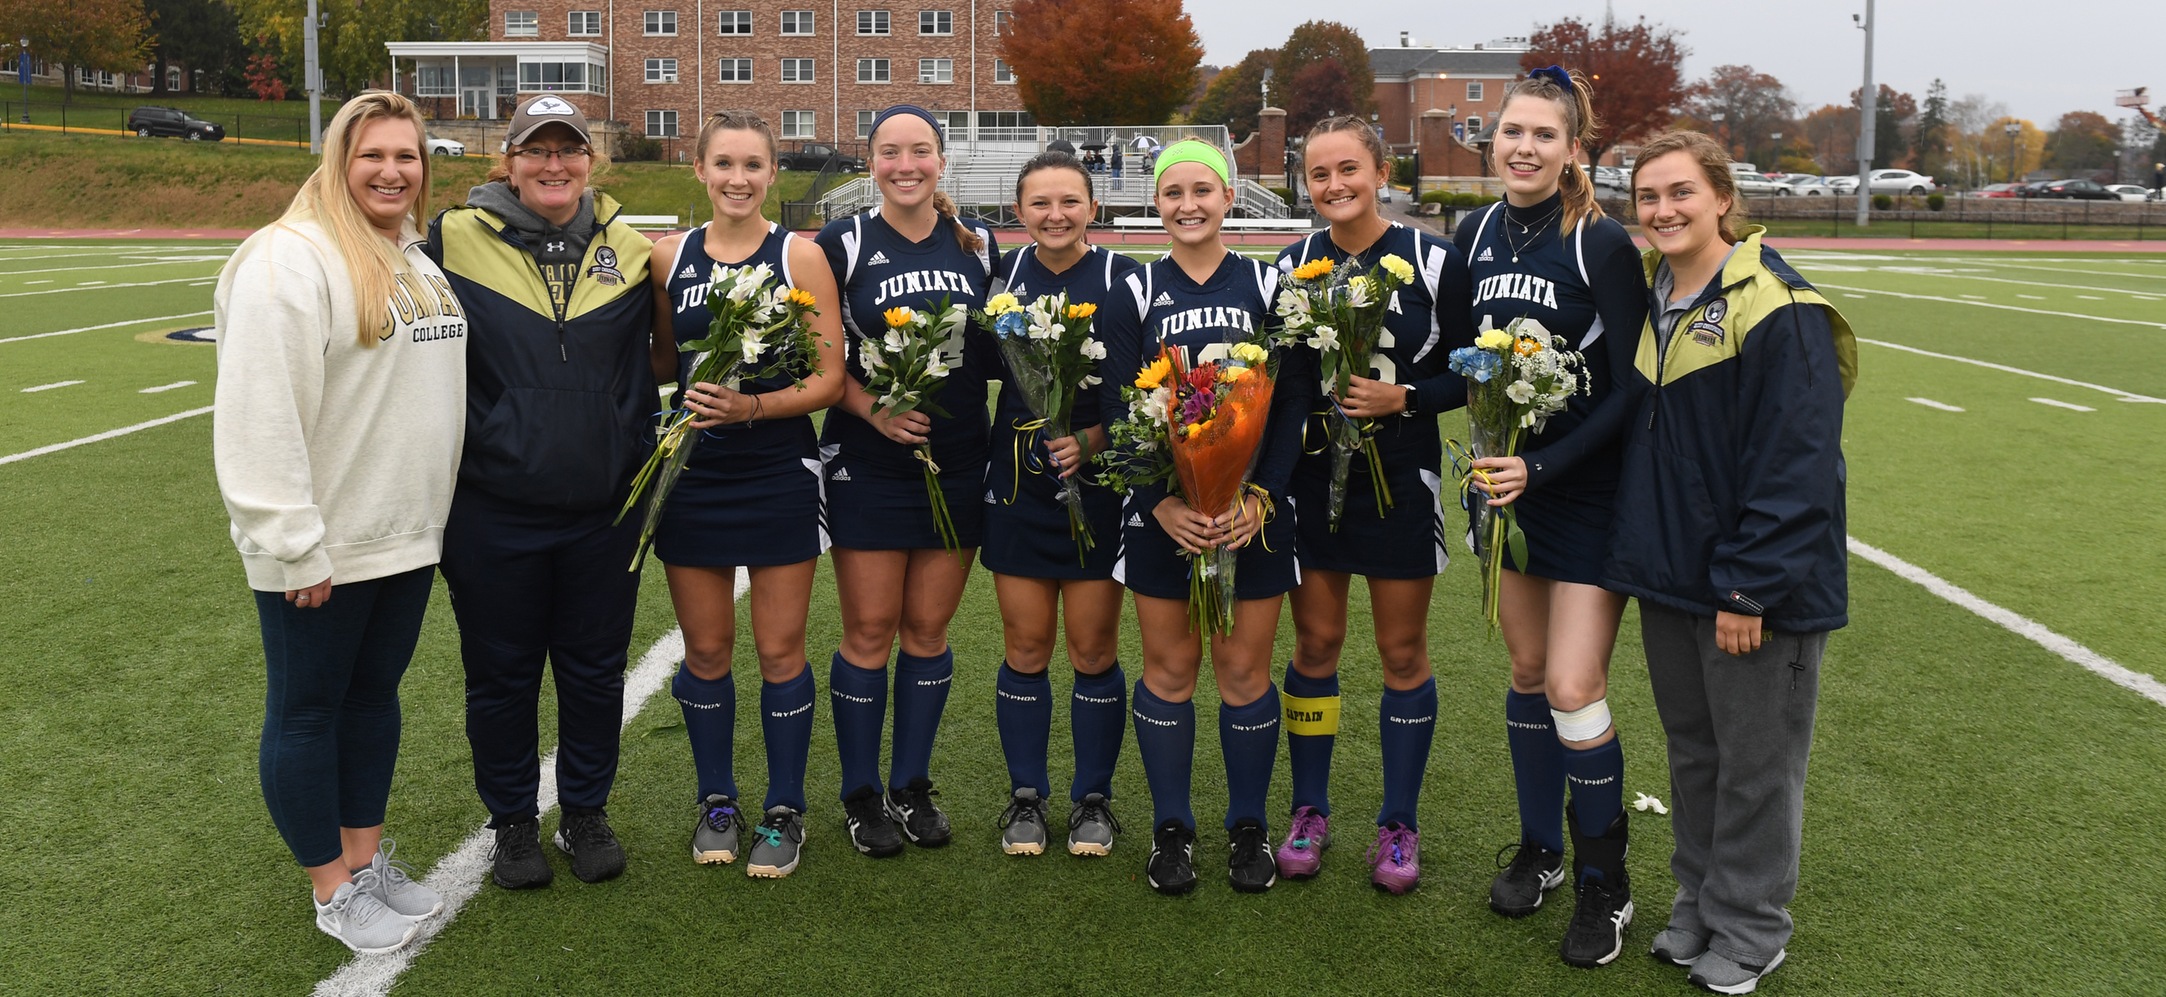 Field Hockey Picks Up Conference Win Over Drew on Senior Day